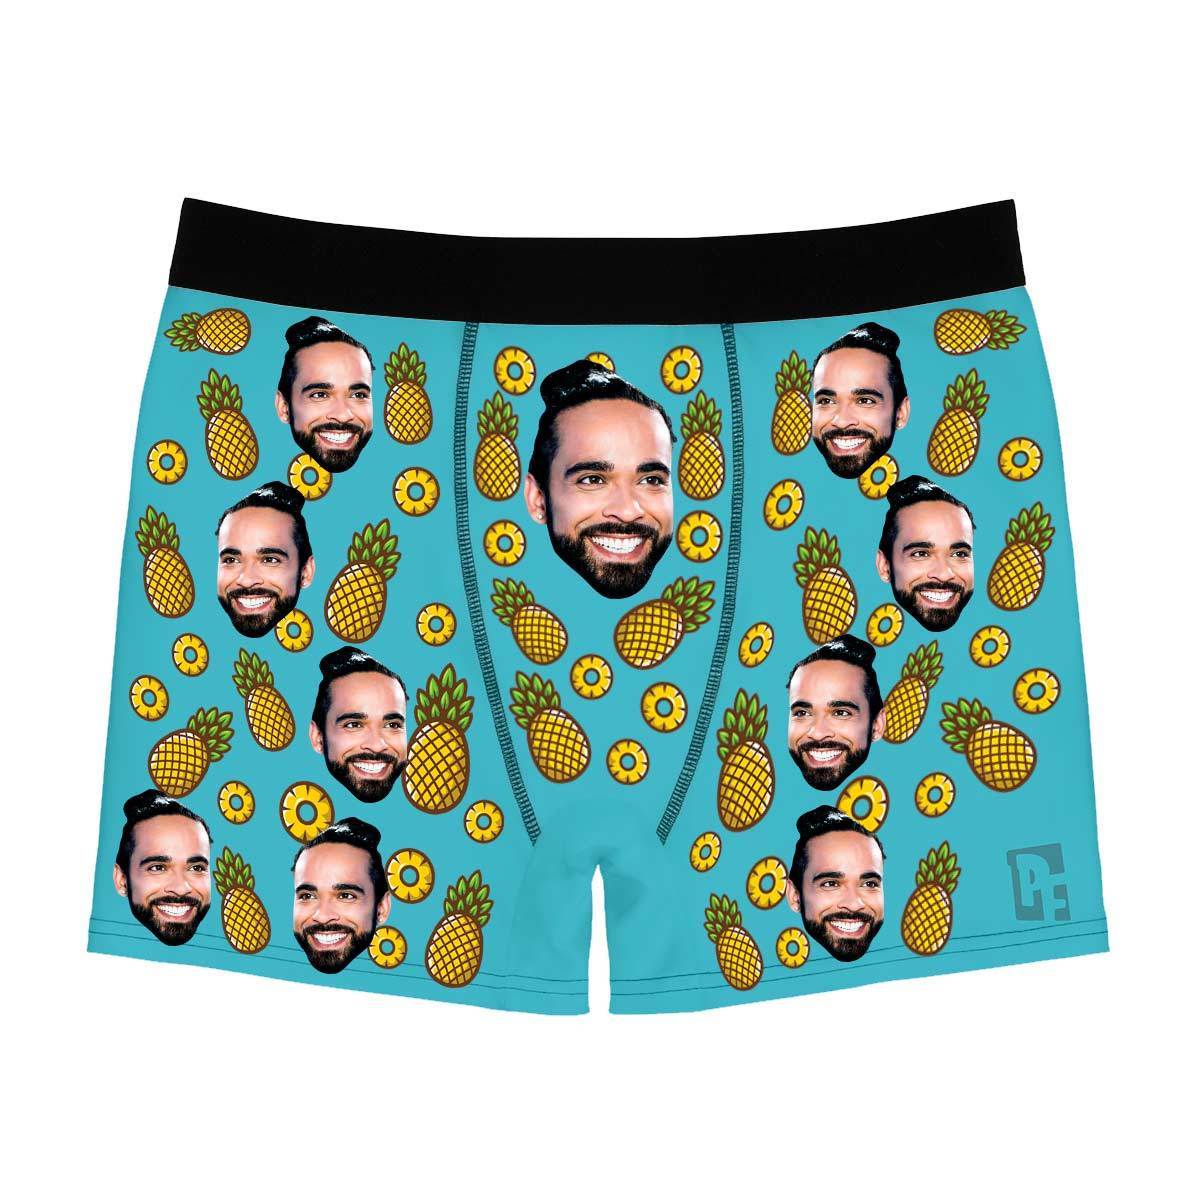 Blue Fruits men's boxer briefs personalized with photo printed on them